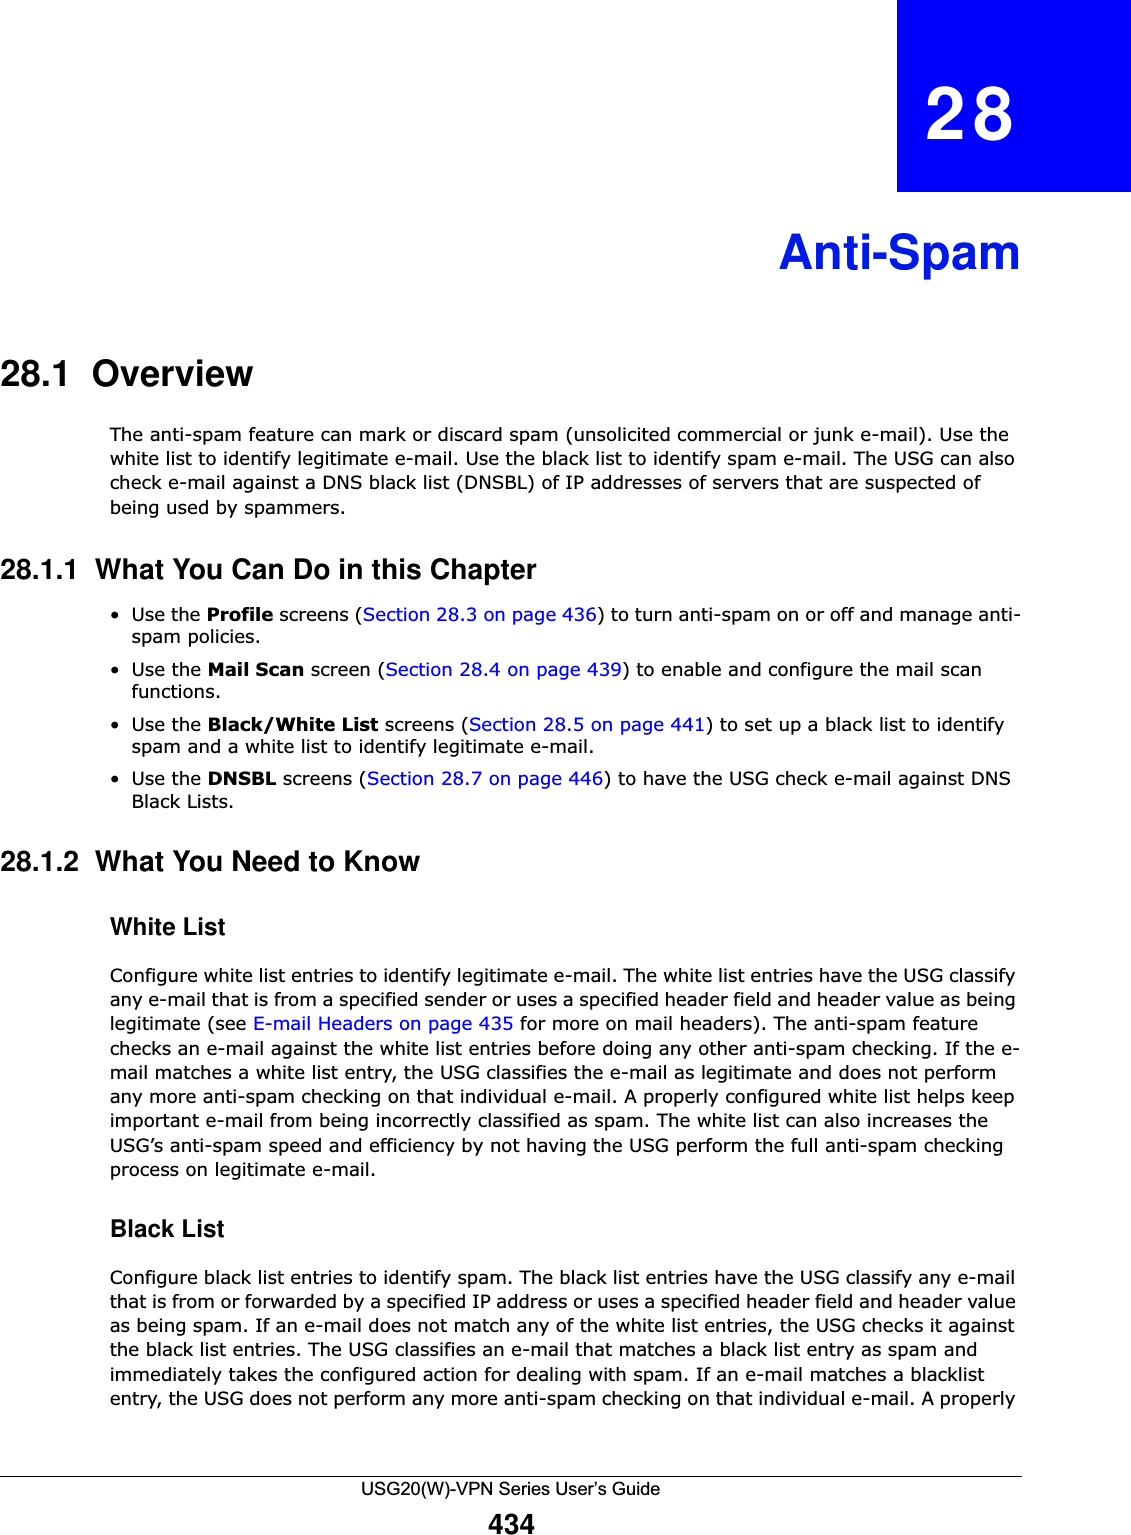 USG20(W)-VPN Series User’s Guide434CHAPTER   28Anti-Spam28.1  OverviewThe anti-spam feature can mark or discard spam (unsolicited commercial or junk e-mail). Use the white list to identify legitimate e-mail. Use the black list to identify spam e-mail. The USG can also check e-mail against a DNS black list (DNSBL) of IP addresses of servers that are suspected of being used by spammers.28.1.1  What You Can Do in this Chapter•Use the Profile screens (Section 28.3 on page 436) to turn anti-spam on or off and manage anti-spam policies.•Use the Mail Scan screen (Section 28.4 on page 439) to enable and configure the mail scan functions.•Use the Black/White List screens (Section 28.5 on page 441) to set up a black list to identify spam and a white list to identify legitimate e-mail. •Use the DNSBL screens (Section 28.7 on page 446) to have the USG check e-mail against DNS Black Lists.28.1.2  What You Need to KnowWhite ListConfigure white list entries to identify legitimate e-mail. The white list entries have the USG classify any e-mail that is from a specified sender or uses a specified header field and header value as being legitimate (see E-mail Headers on page 435 for more on mail headers). The anti-spam feature checks an e-mail against the white list entries before doing any other anti-spam checking. If the e-mail matches a white list entry, the USG classifies the e-mail as legitimate and does not perform any more anti-spam checking on that individual e-mail. A properly configured white list helps keep important e-mail from being incorrectly classified as spam. The white list can also increases the USG’s anti-spam speed and efficiency by not having the USG perform the full anti-spam checking process on legitimate e-mail. Black ListConfigure black list entries to identify spam. The black list entries have the USG classify any e-mail that is from or forwarded by a specified IP address or uses a specified header field and header value as being spam. If an e-mail does not match any of the white list entries, the USG checks it against the black list entries. The USG classifies an e-mail that matches a black list entry as spam and immediately takes the configured action for dealing with spam. If an e-mail matches a blacklist entry, the USG does not perform any more anti-spam checking on that individual e-mail. A properly 